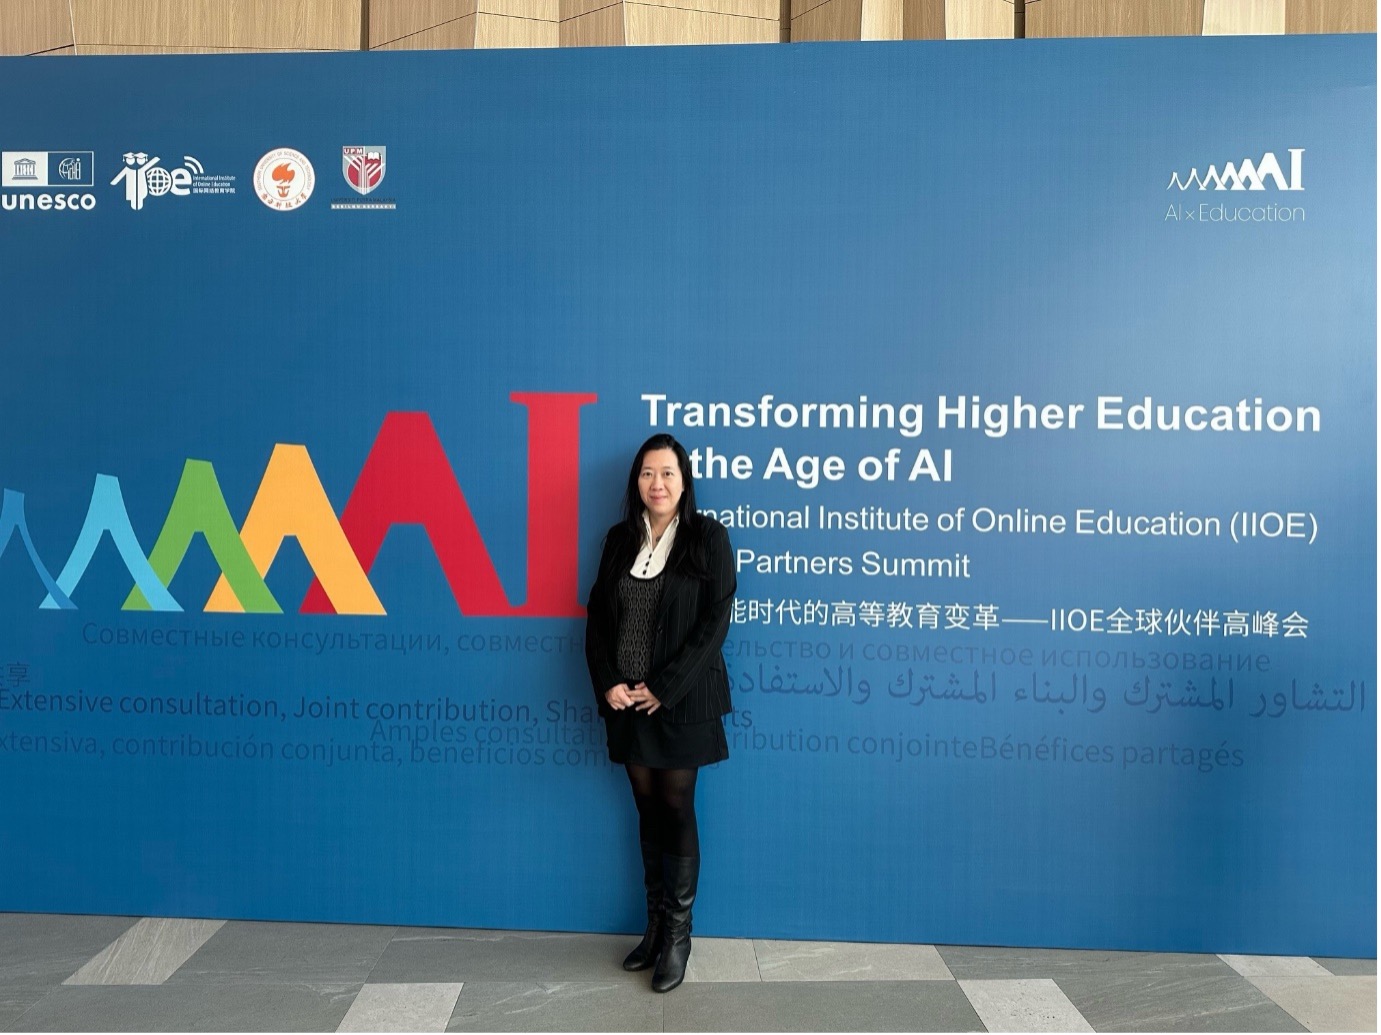 7th Dec 2023 – Prof. Cecilia Chan was invited as the Keynote Speaker to present at the International Institute of Online Education (IIOE) Global Partners Summit - Transforming Higher Education in the Age of AI organized by UNESCO